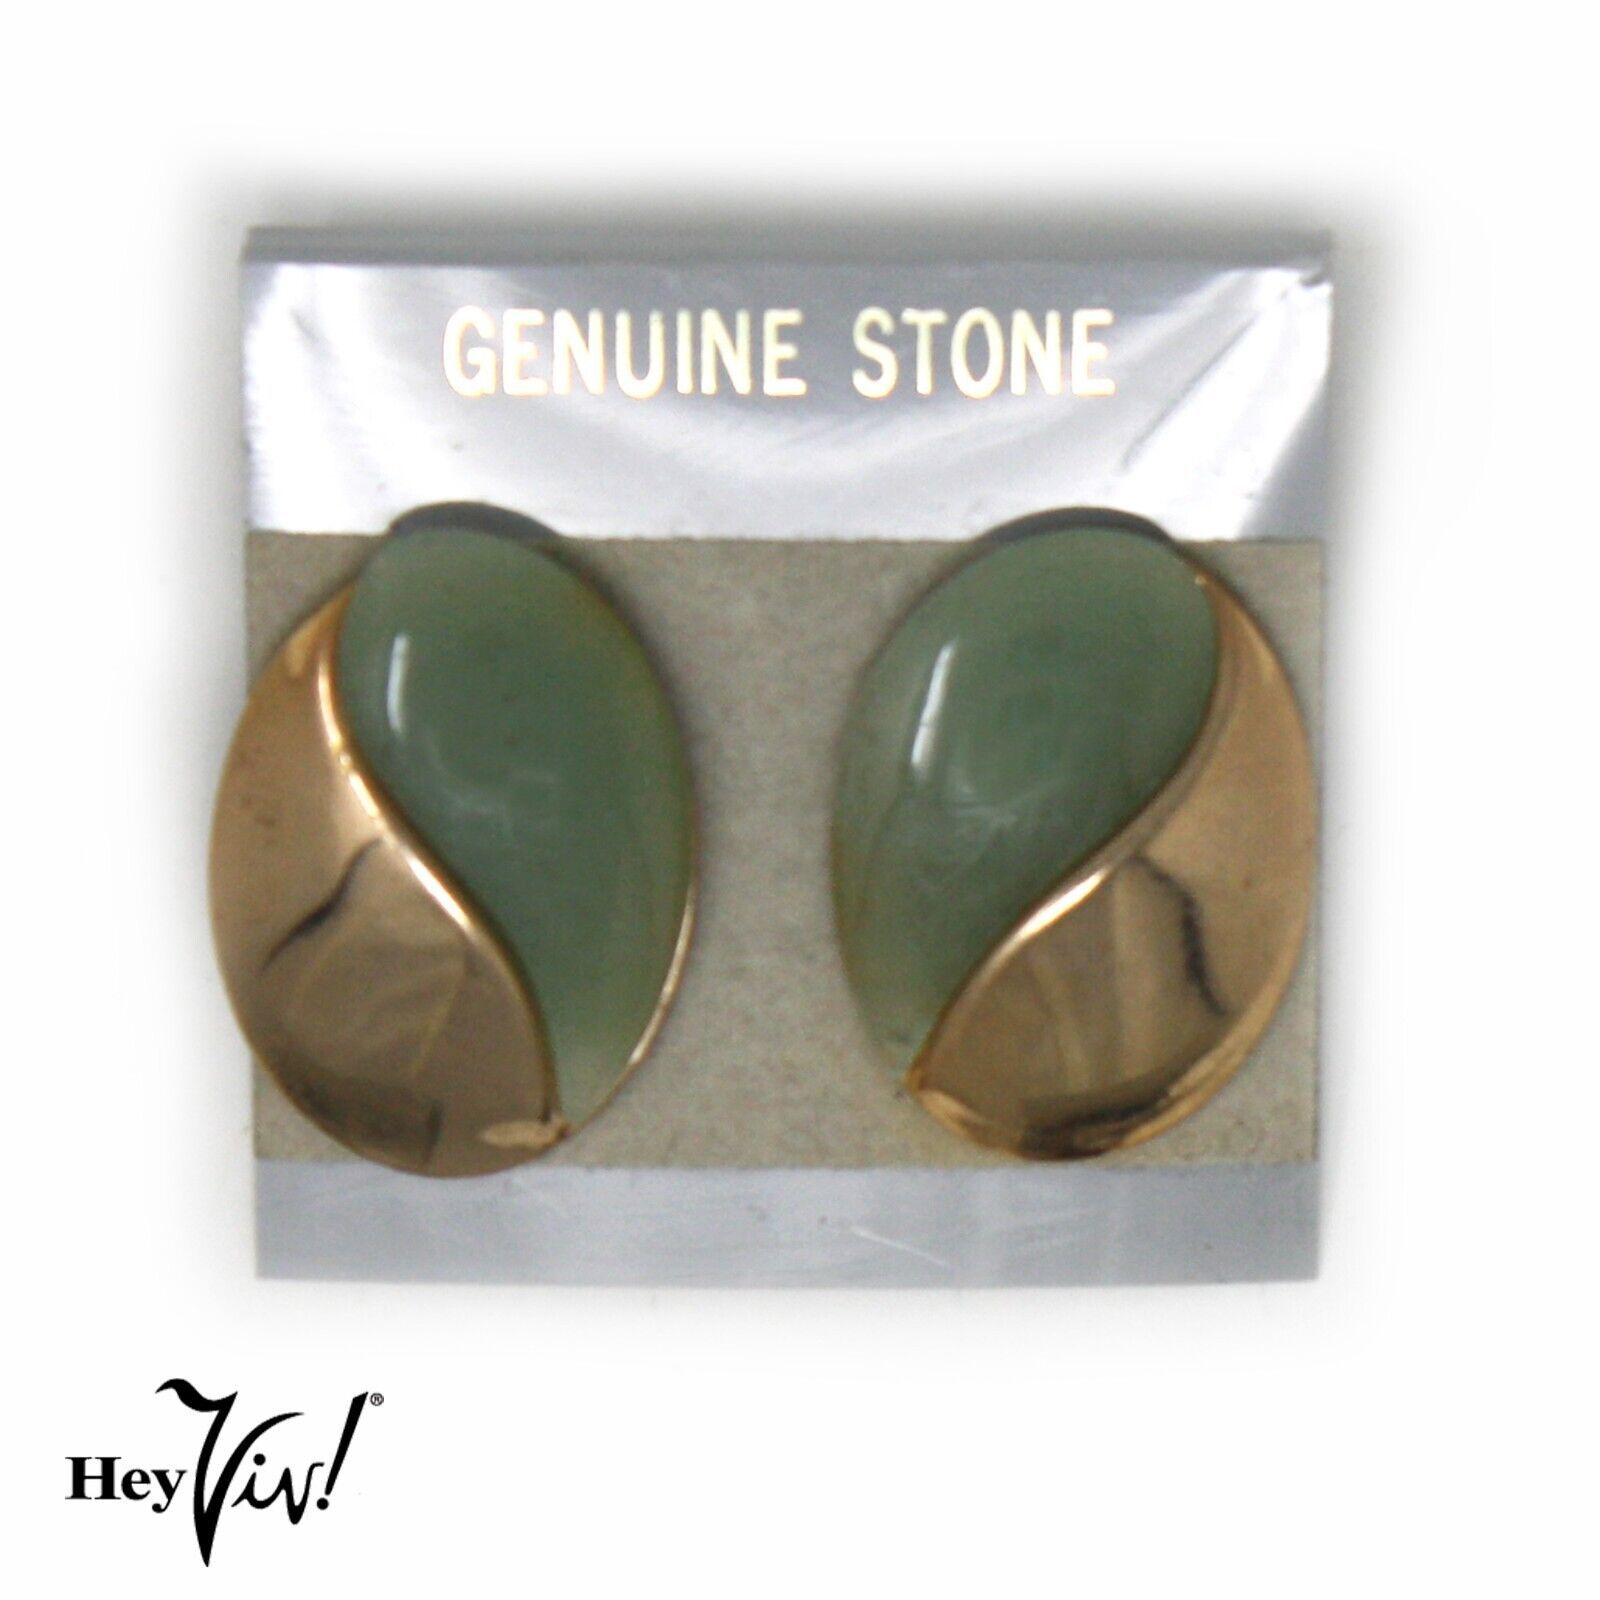 Primary image for Vintage 1980s Green Stone Button Earrings on Card New/Old Store Stock - Hey Viv